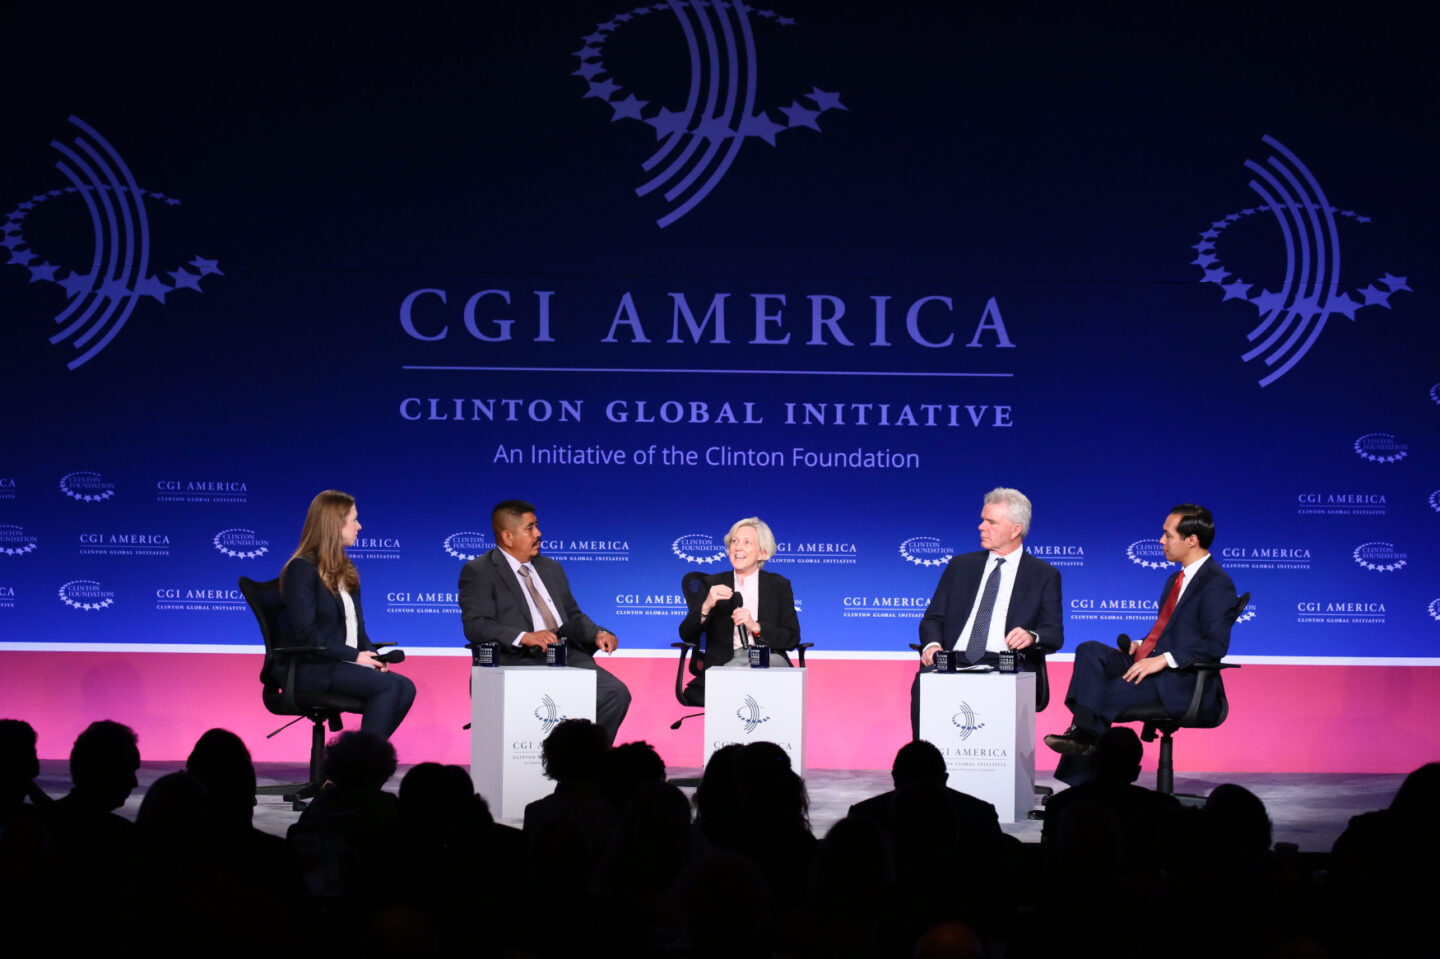 Chelsea Clinton, Lucas Benitez, Kyle Zimmer, Kip Tindell, and Julián Castro participate in a panel discussion